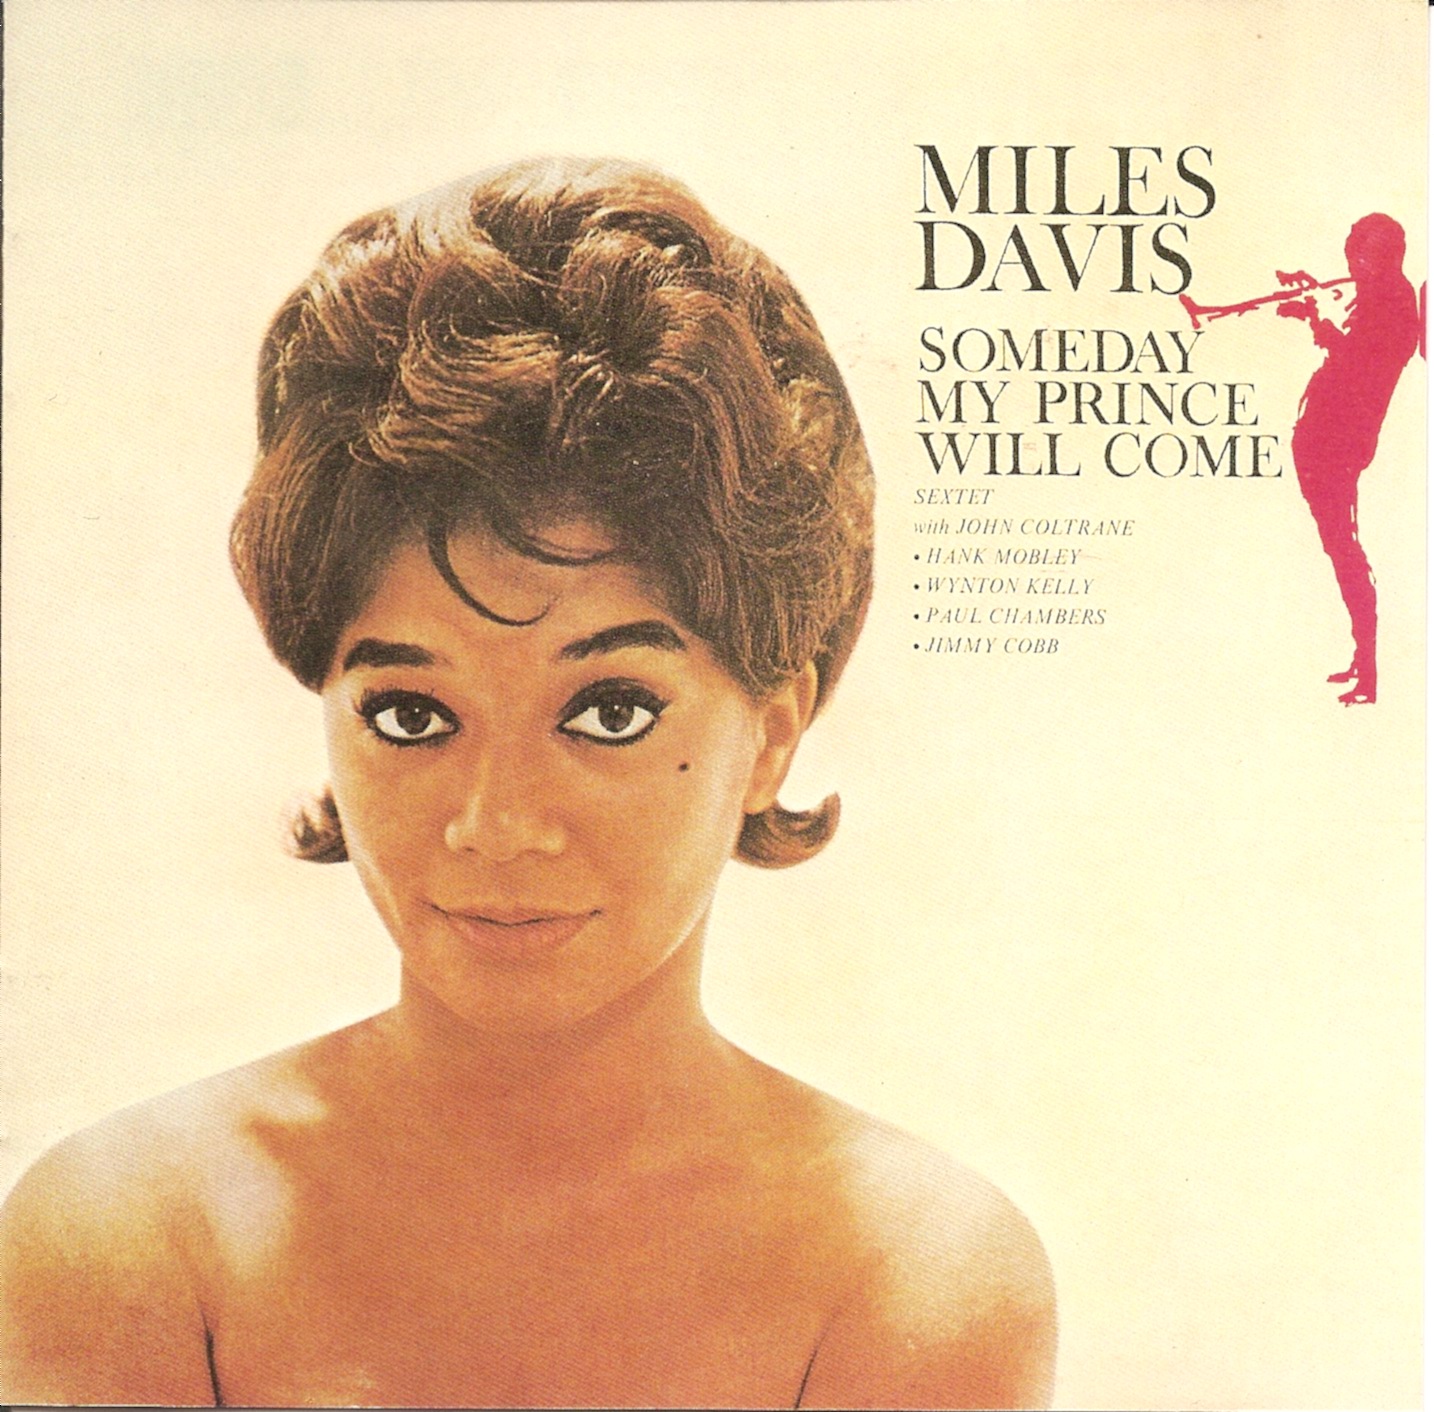 The First Pressing CD Collection: Miles Davis - Someday My Prince WIll Come